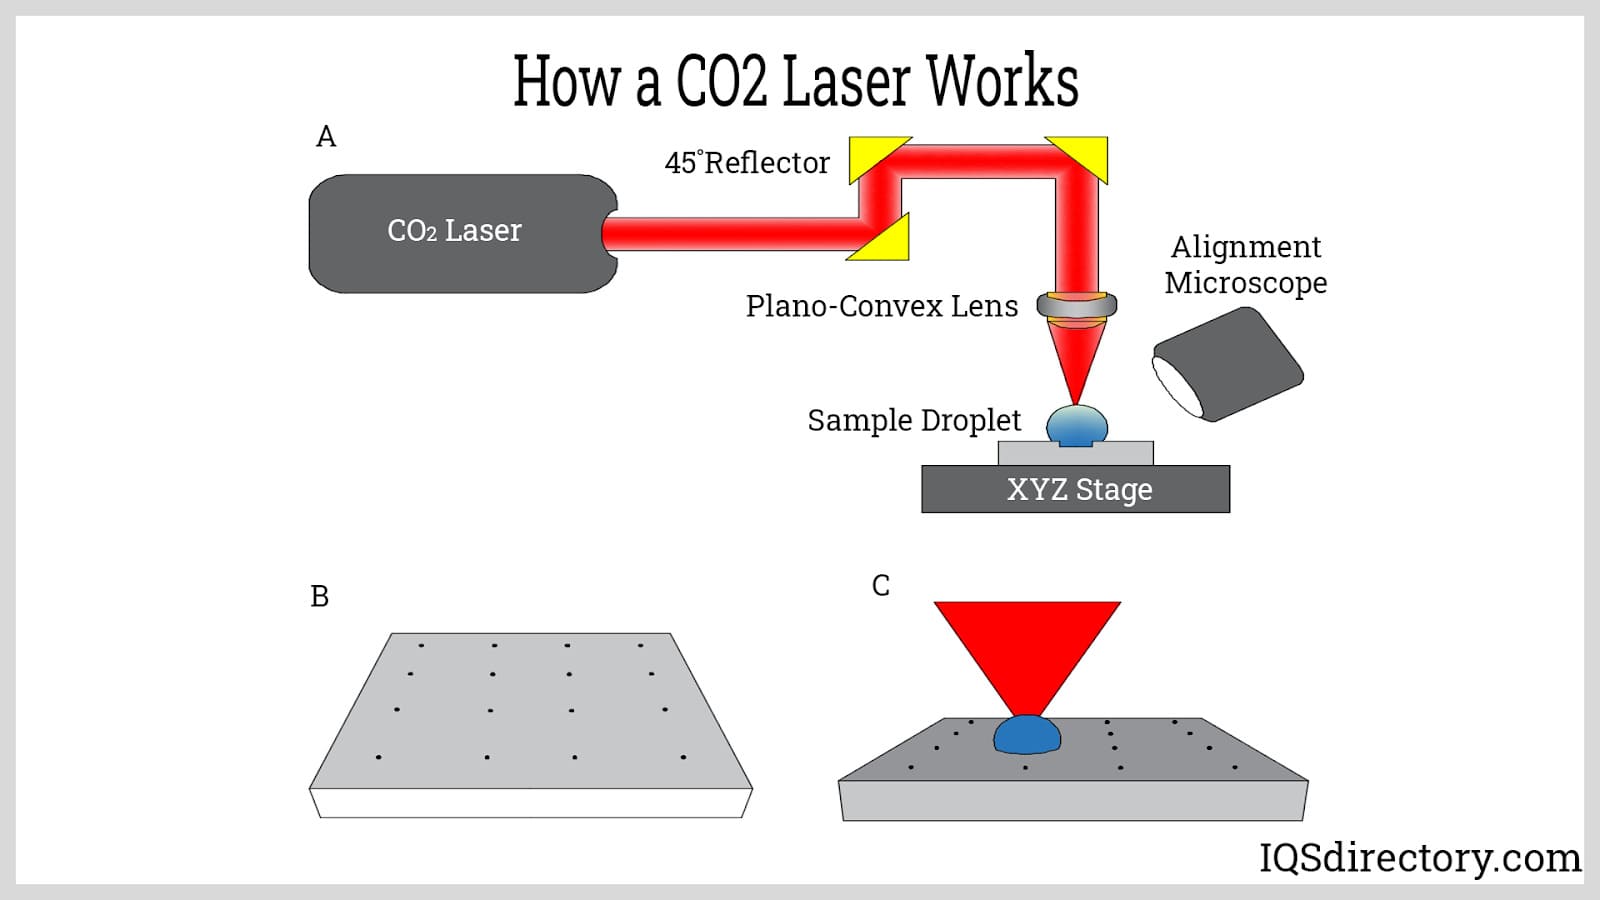 How a CO2 Laser Works